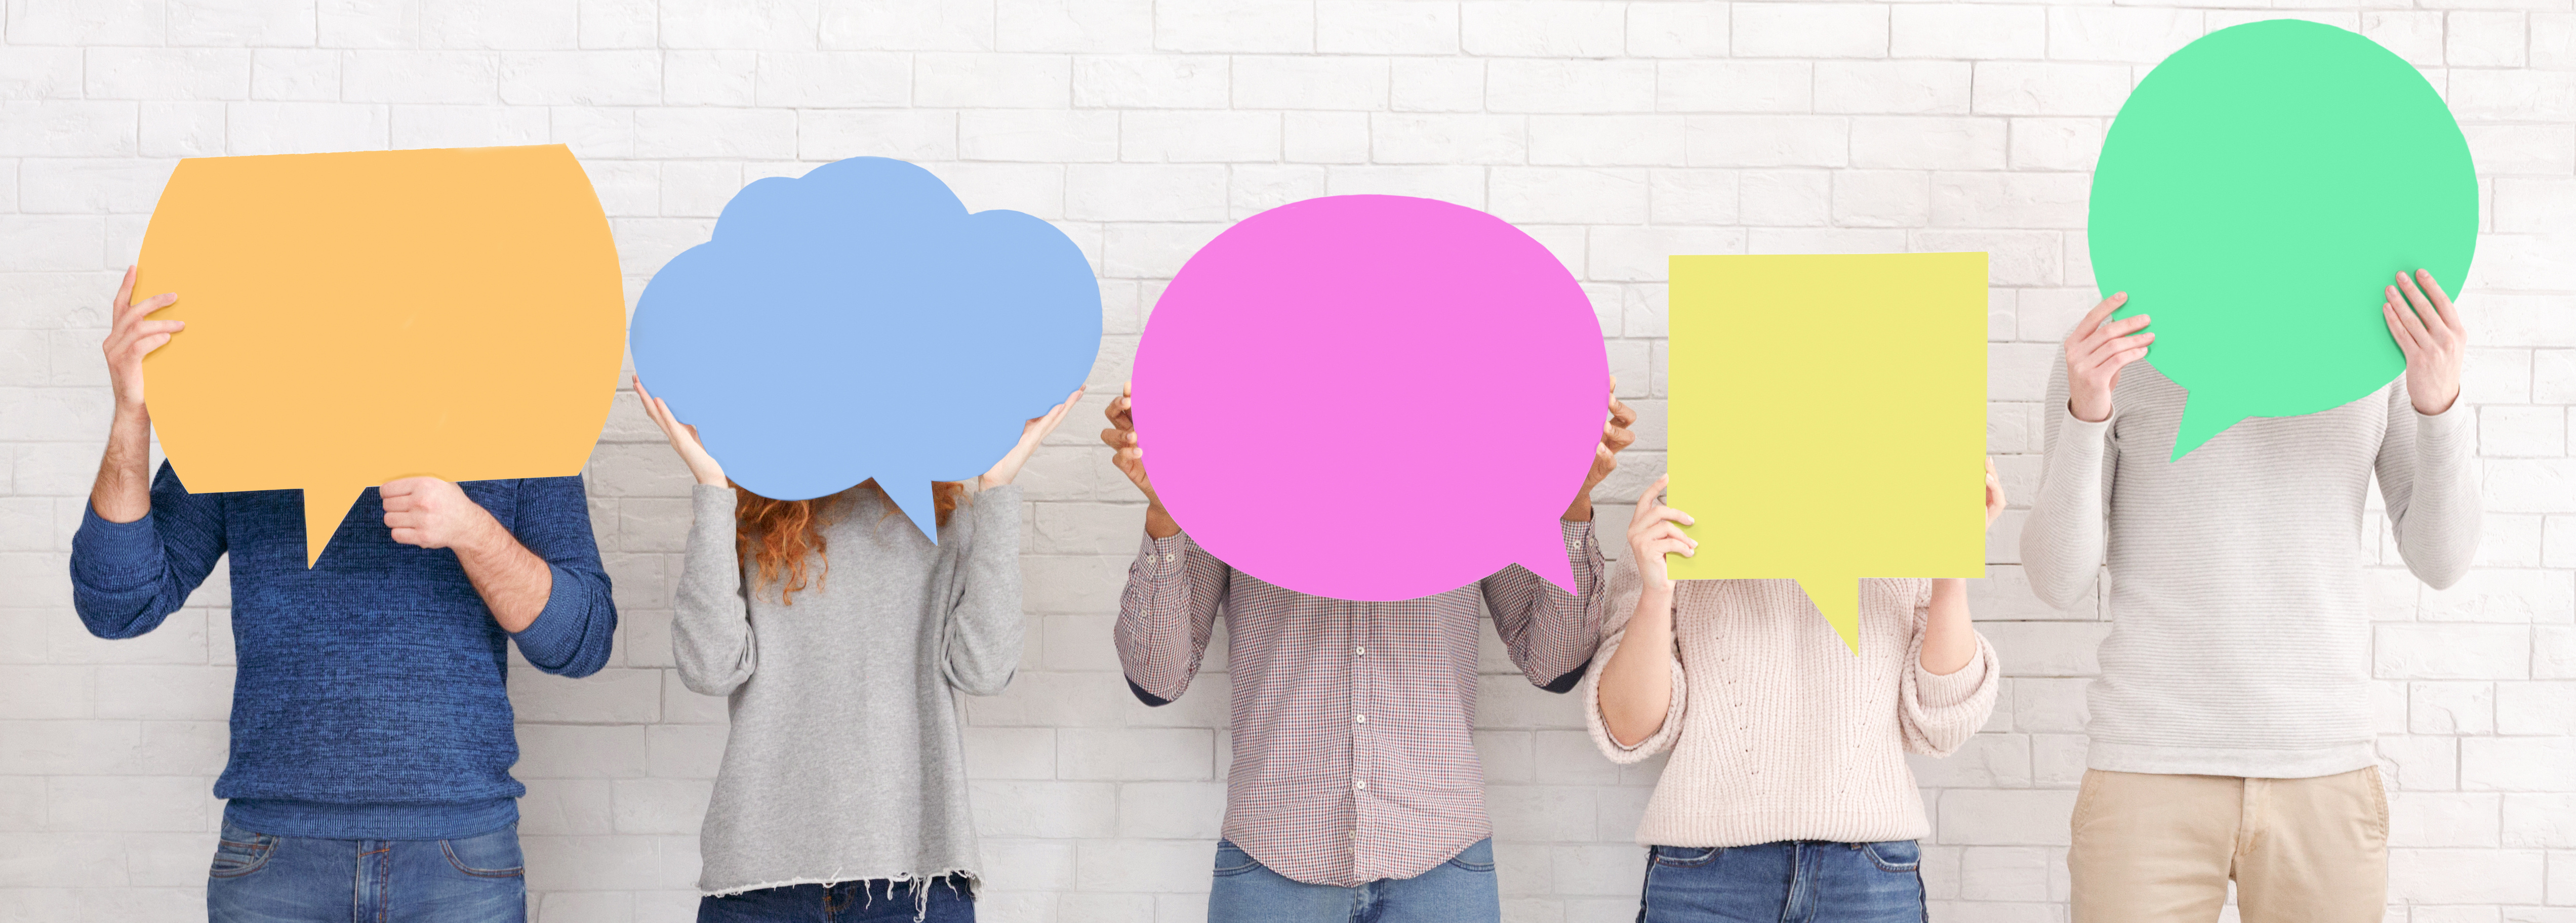 Friends holding speech bubbles with copy space over white wall, crop